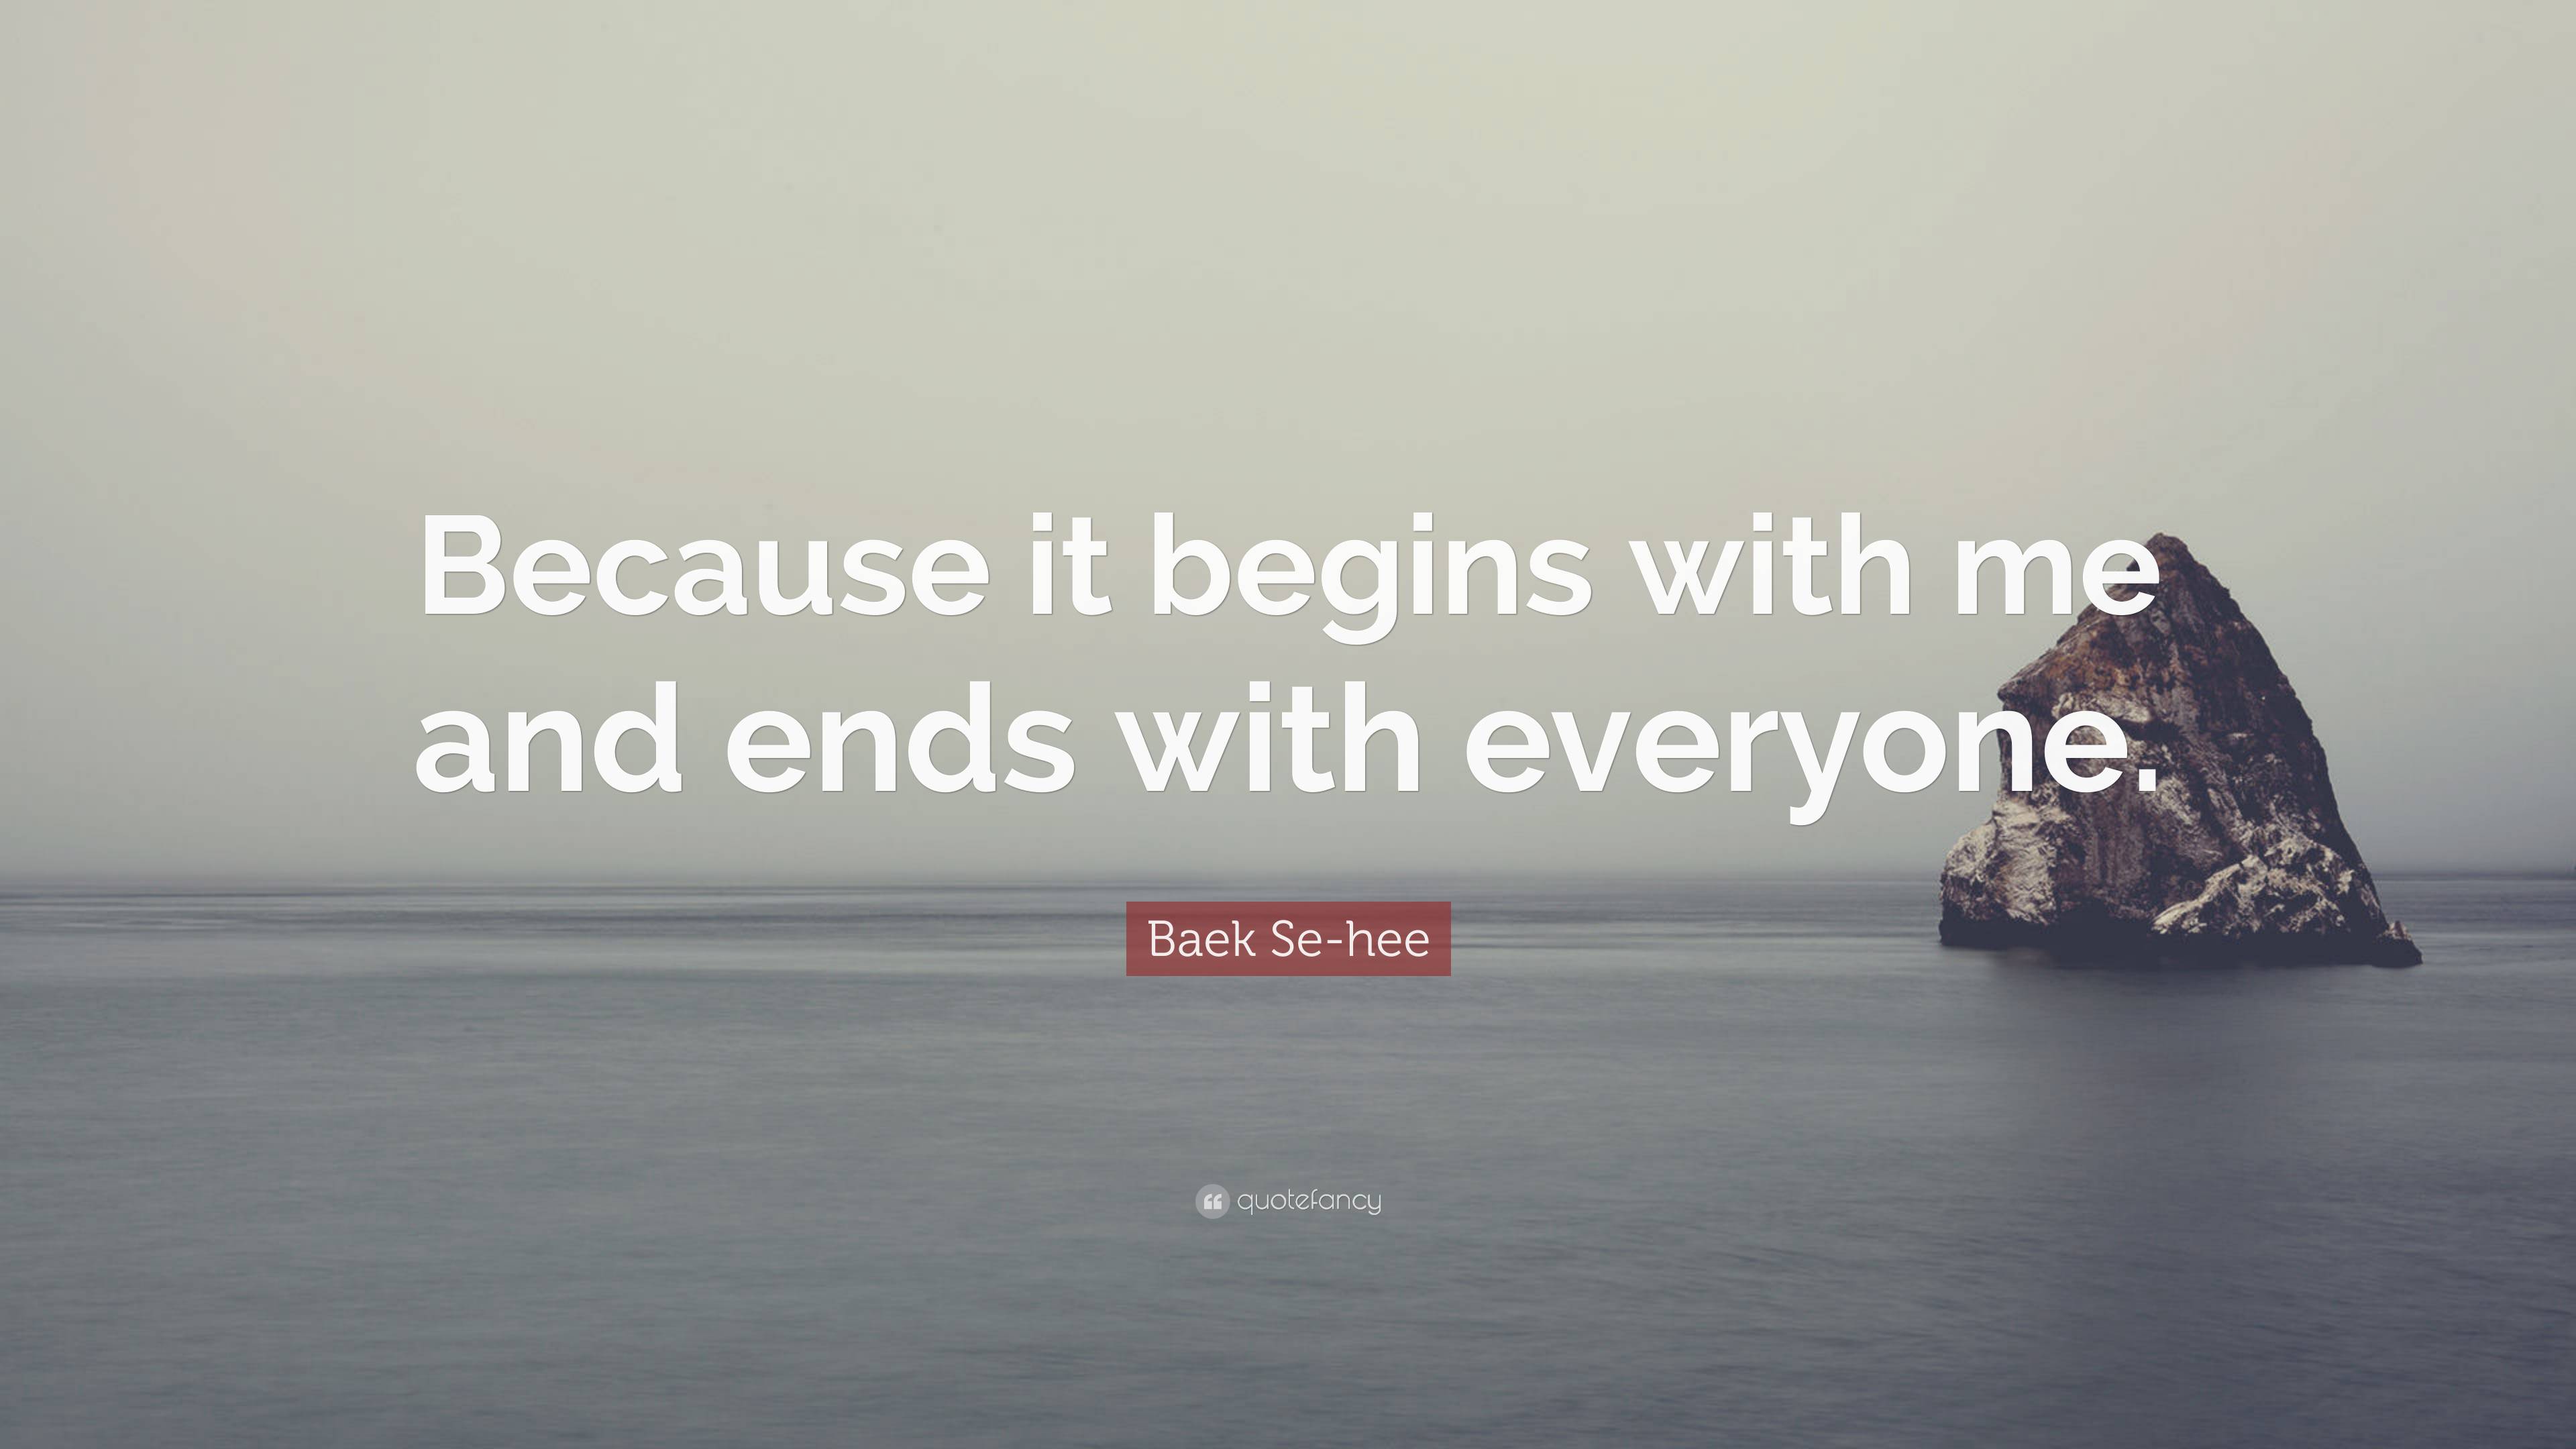 Baek Se-hee Quote: “Because it begins with me and ends with everyone.”